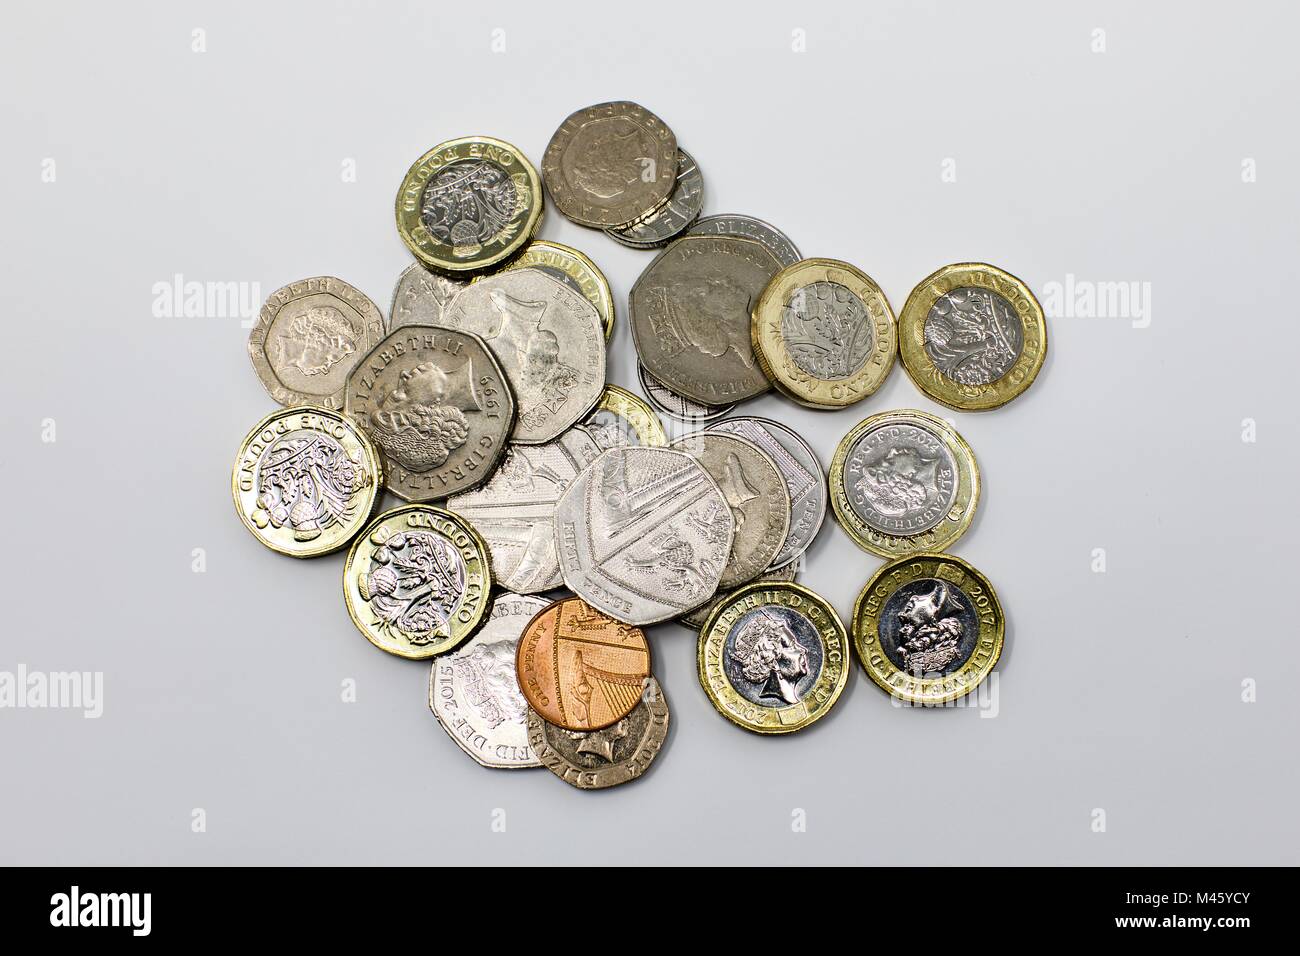 Collection of British coins Stock Photo